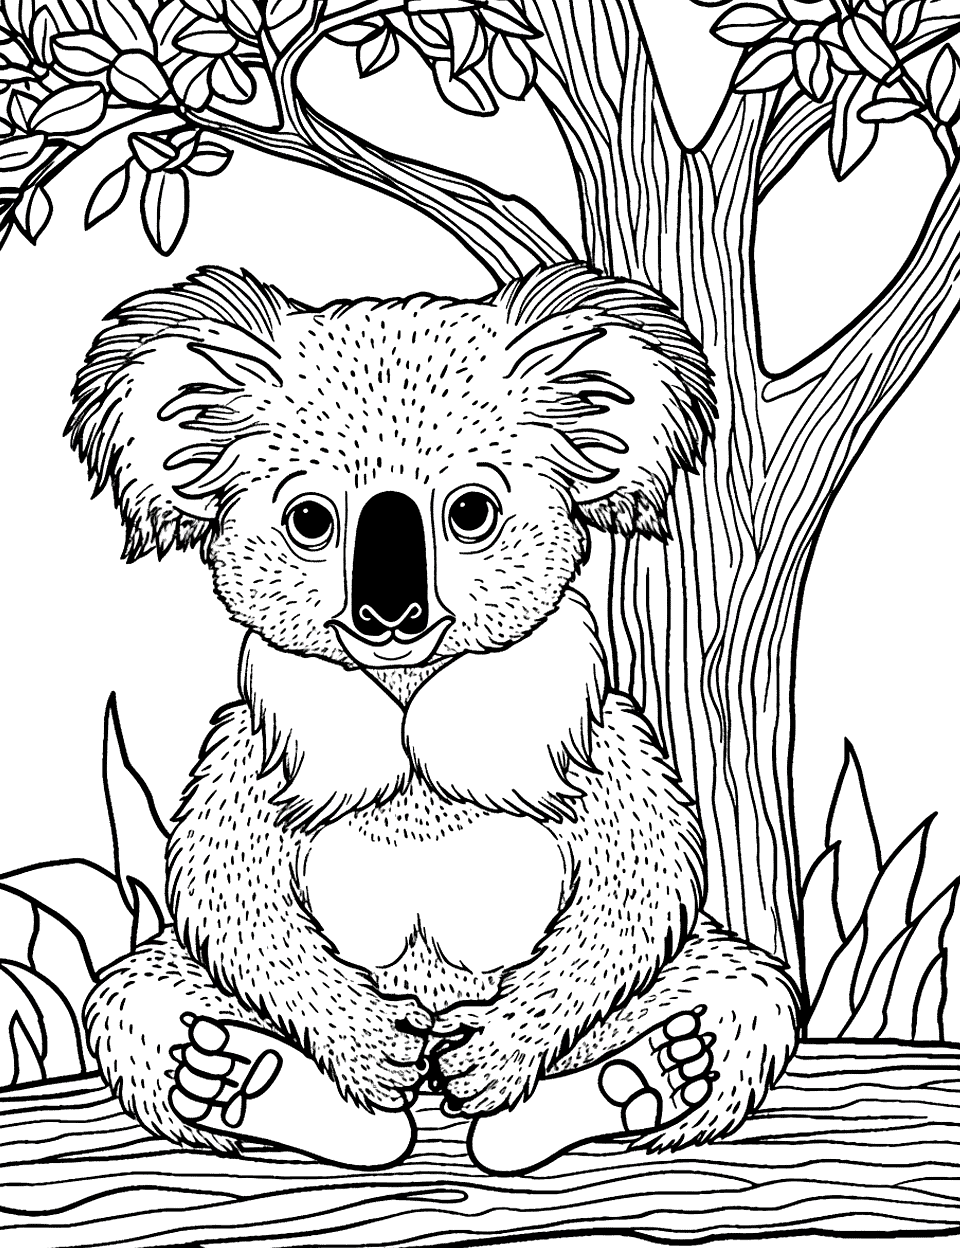 Zen Koala Meditating Coloring Page - A koala in a meditative pose under a tree, with a peaceful expression.